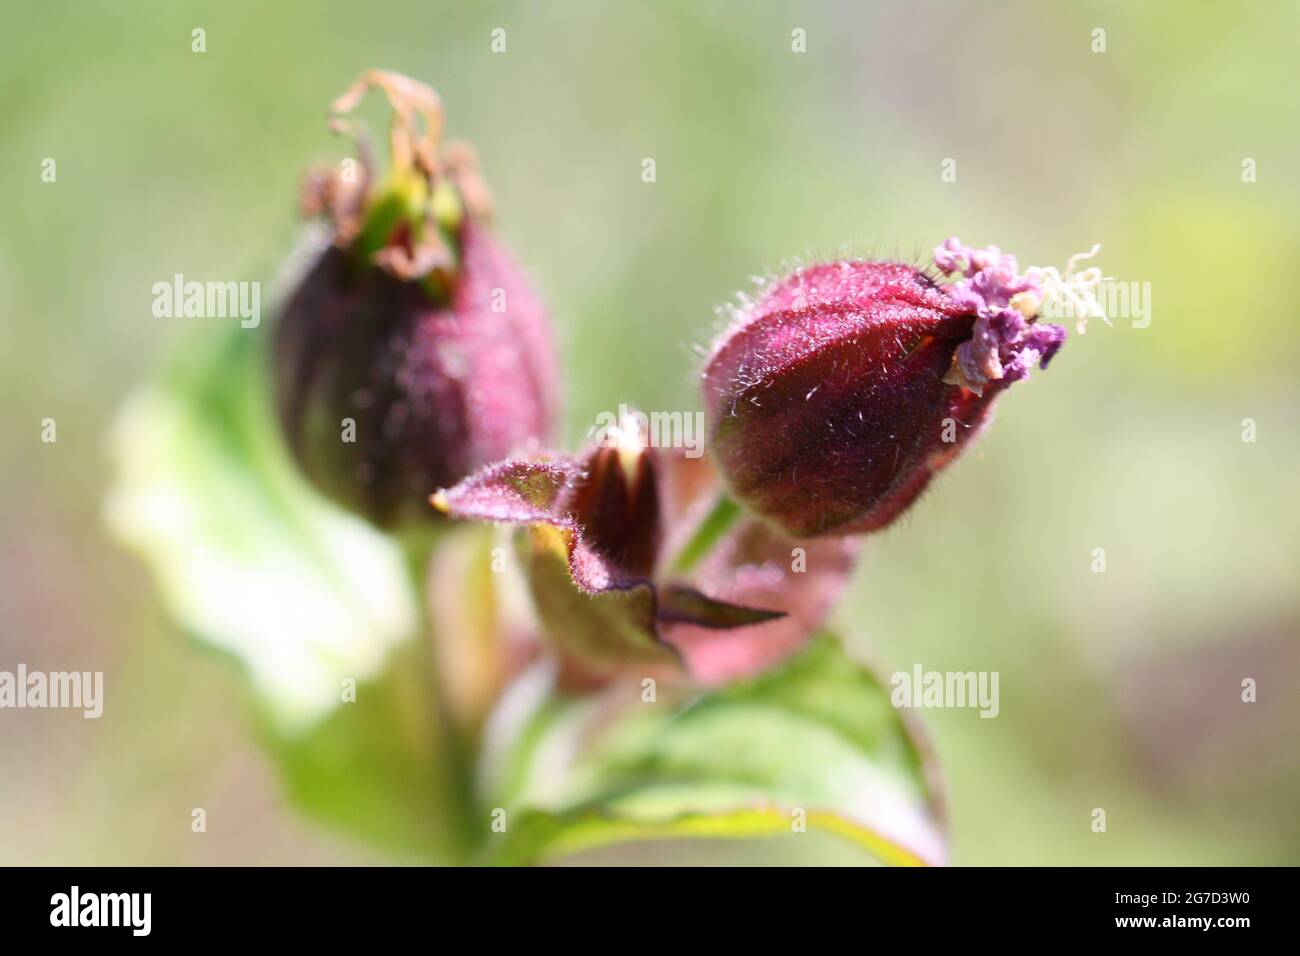 Macro close-up of Red Campion (Silene dioica) flower buds in the sunshine. Selective focus on right-hand bud. Short depth of field. Stock Photo